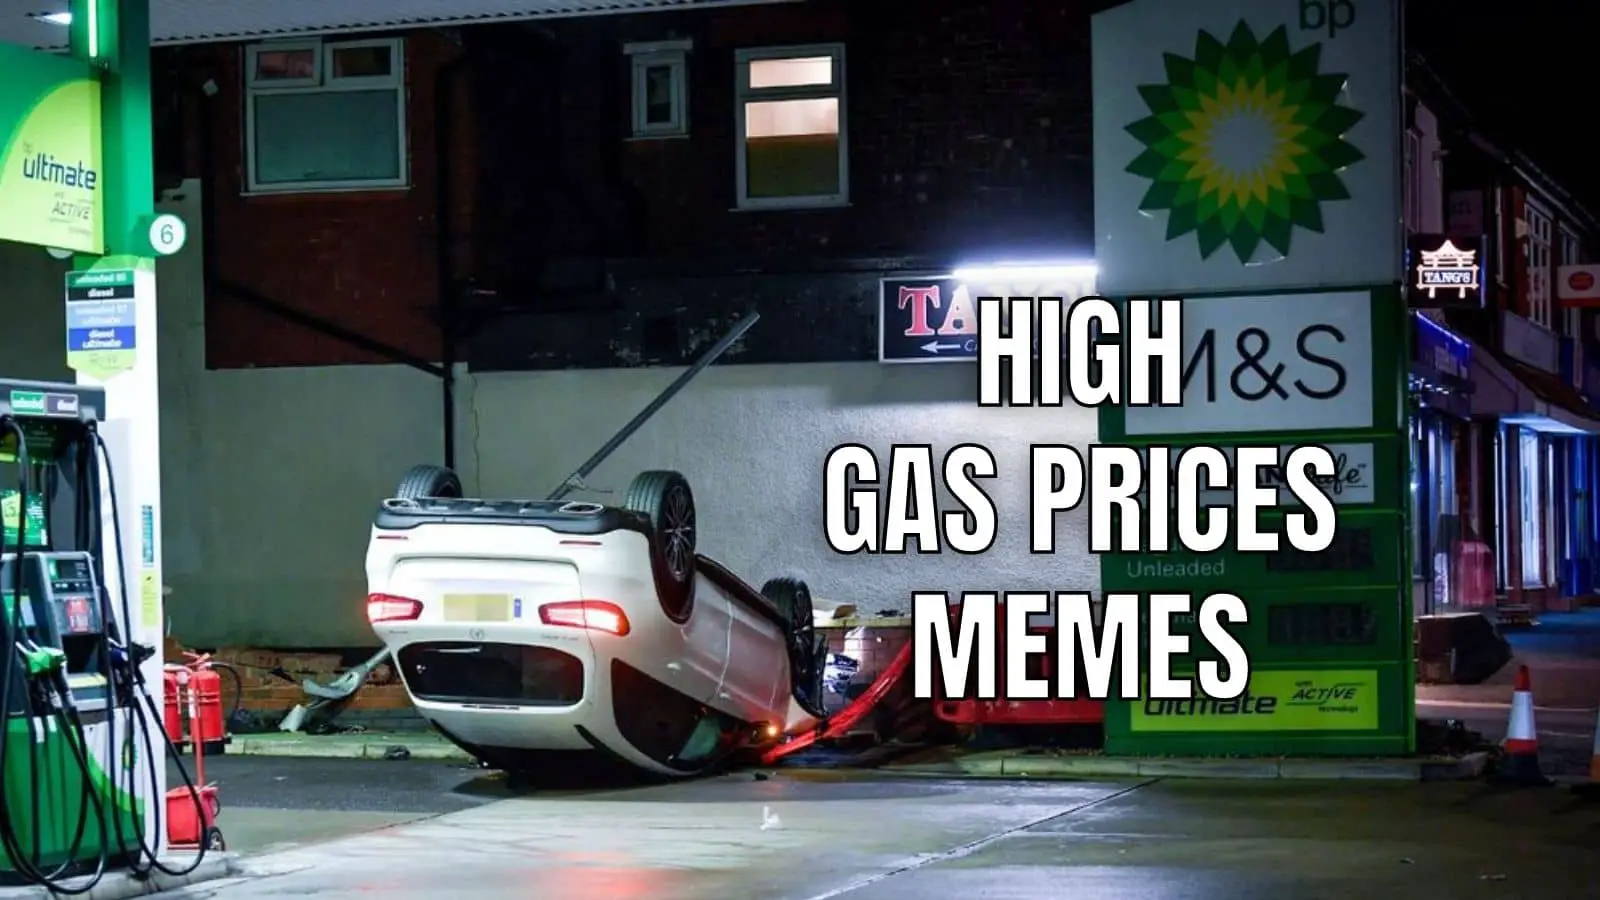 High Gas Prices Memes on Car